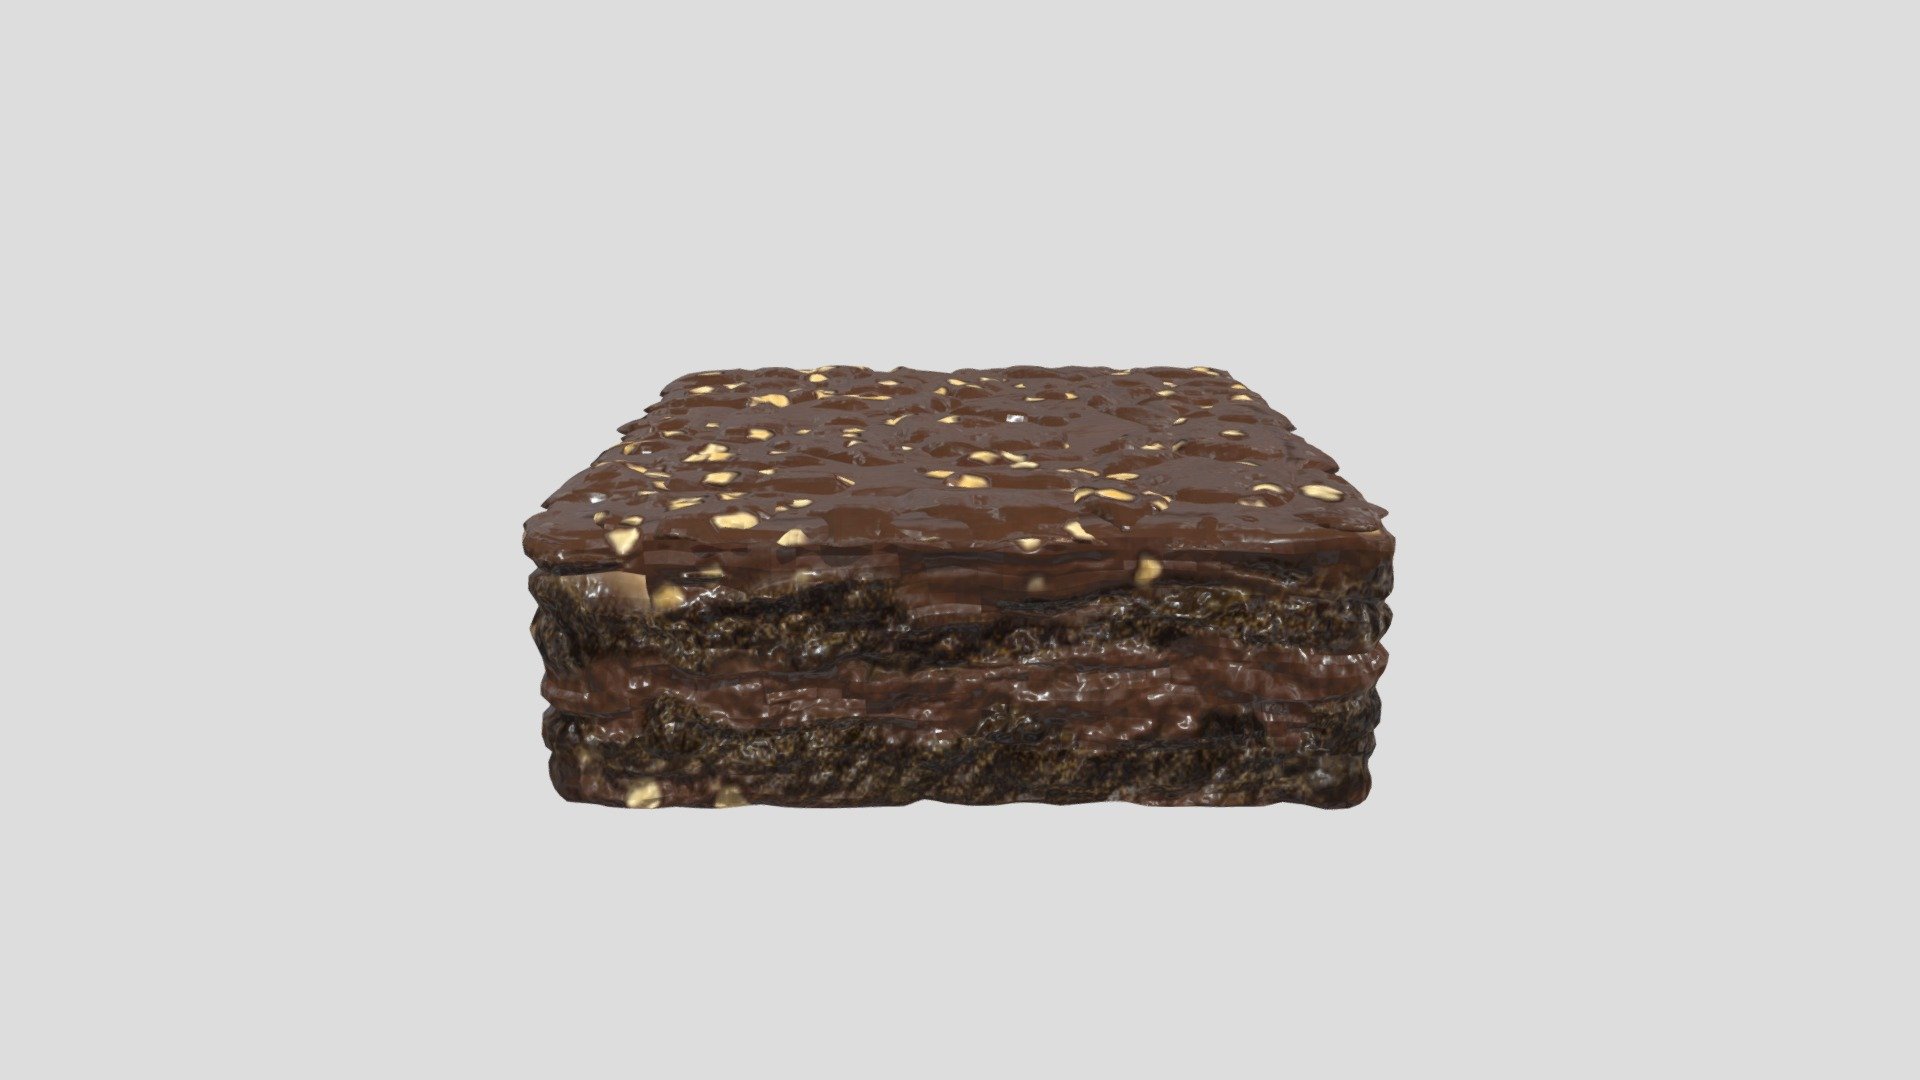 3d model of a Brownie. Perfect for games, scenes or renders.

Model is correctly divided into main parts. All main parts are presented as separate parts therefore materials of objects are easy to be modified or removed and standard parts are easy to be replaced.

TEXTURES: Models includes high textures with maps: Base Color (.png) Height (.png) Metallic (.png) Normal (.png) Roughness (.png)

FORMATS: .obj .dae .stl .blend .fbx .3ds

GENERAL: Easy editable. Model is fully textured.

Vertices: 30.6 k Polygons: 30.6 k

All formats have been tested and work correctly.

Some files may need textures or materials adjusted or added depending on the program they are imported into 3d model